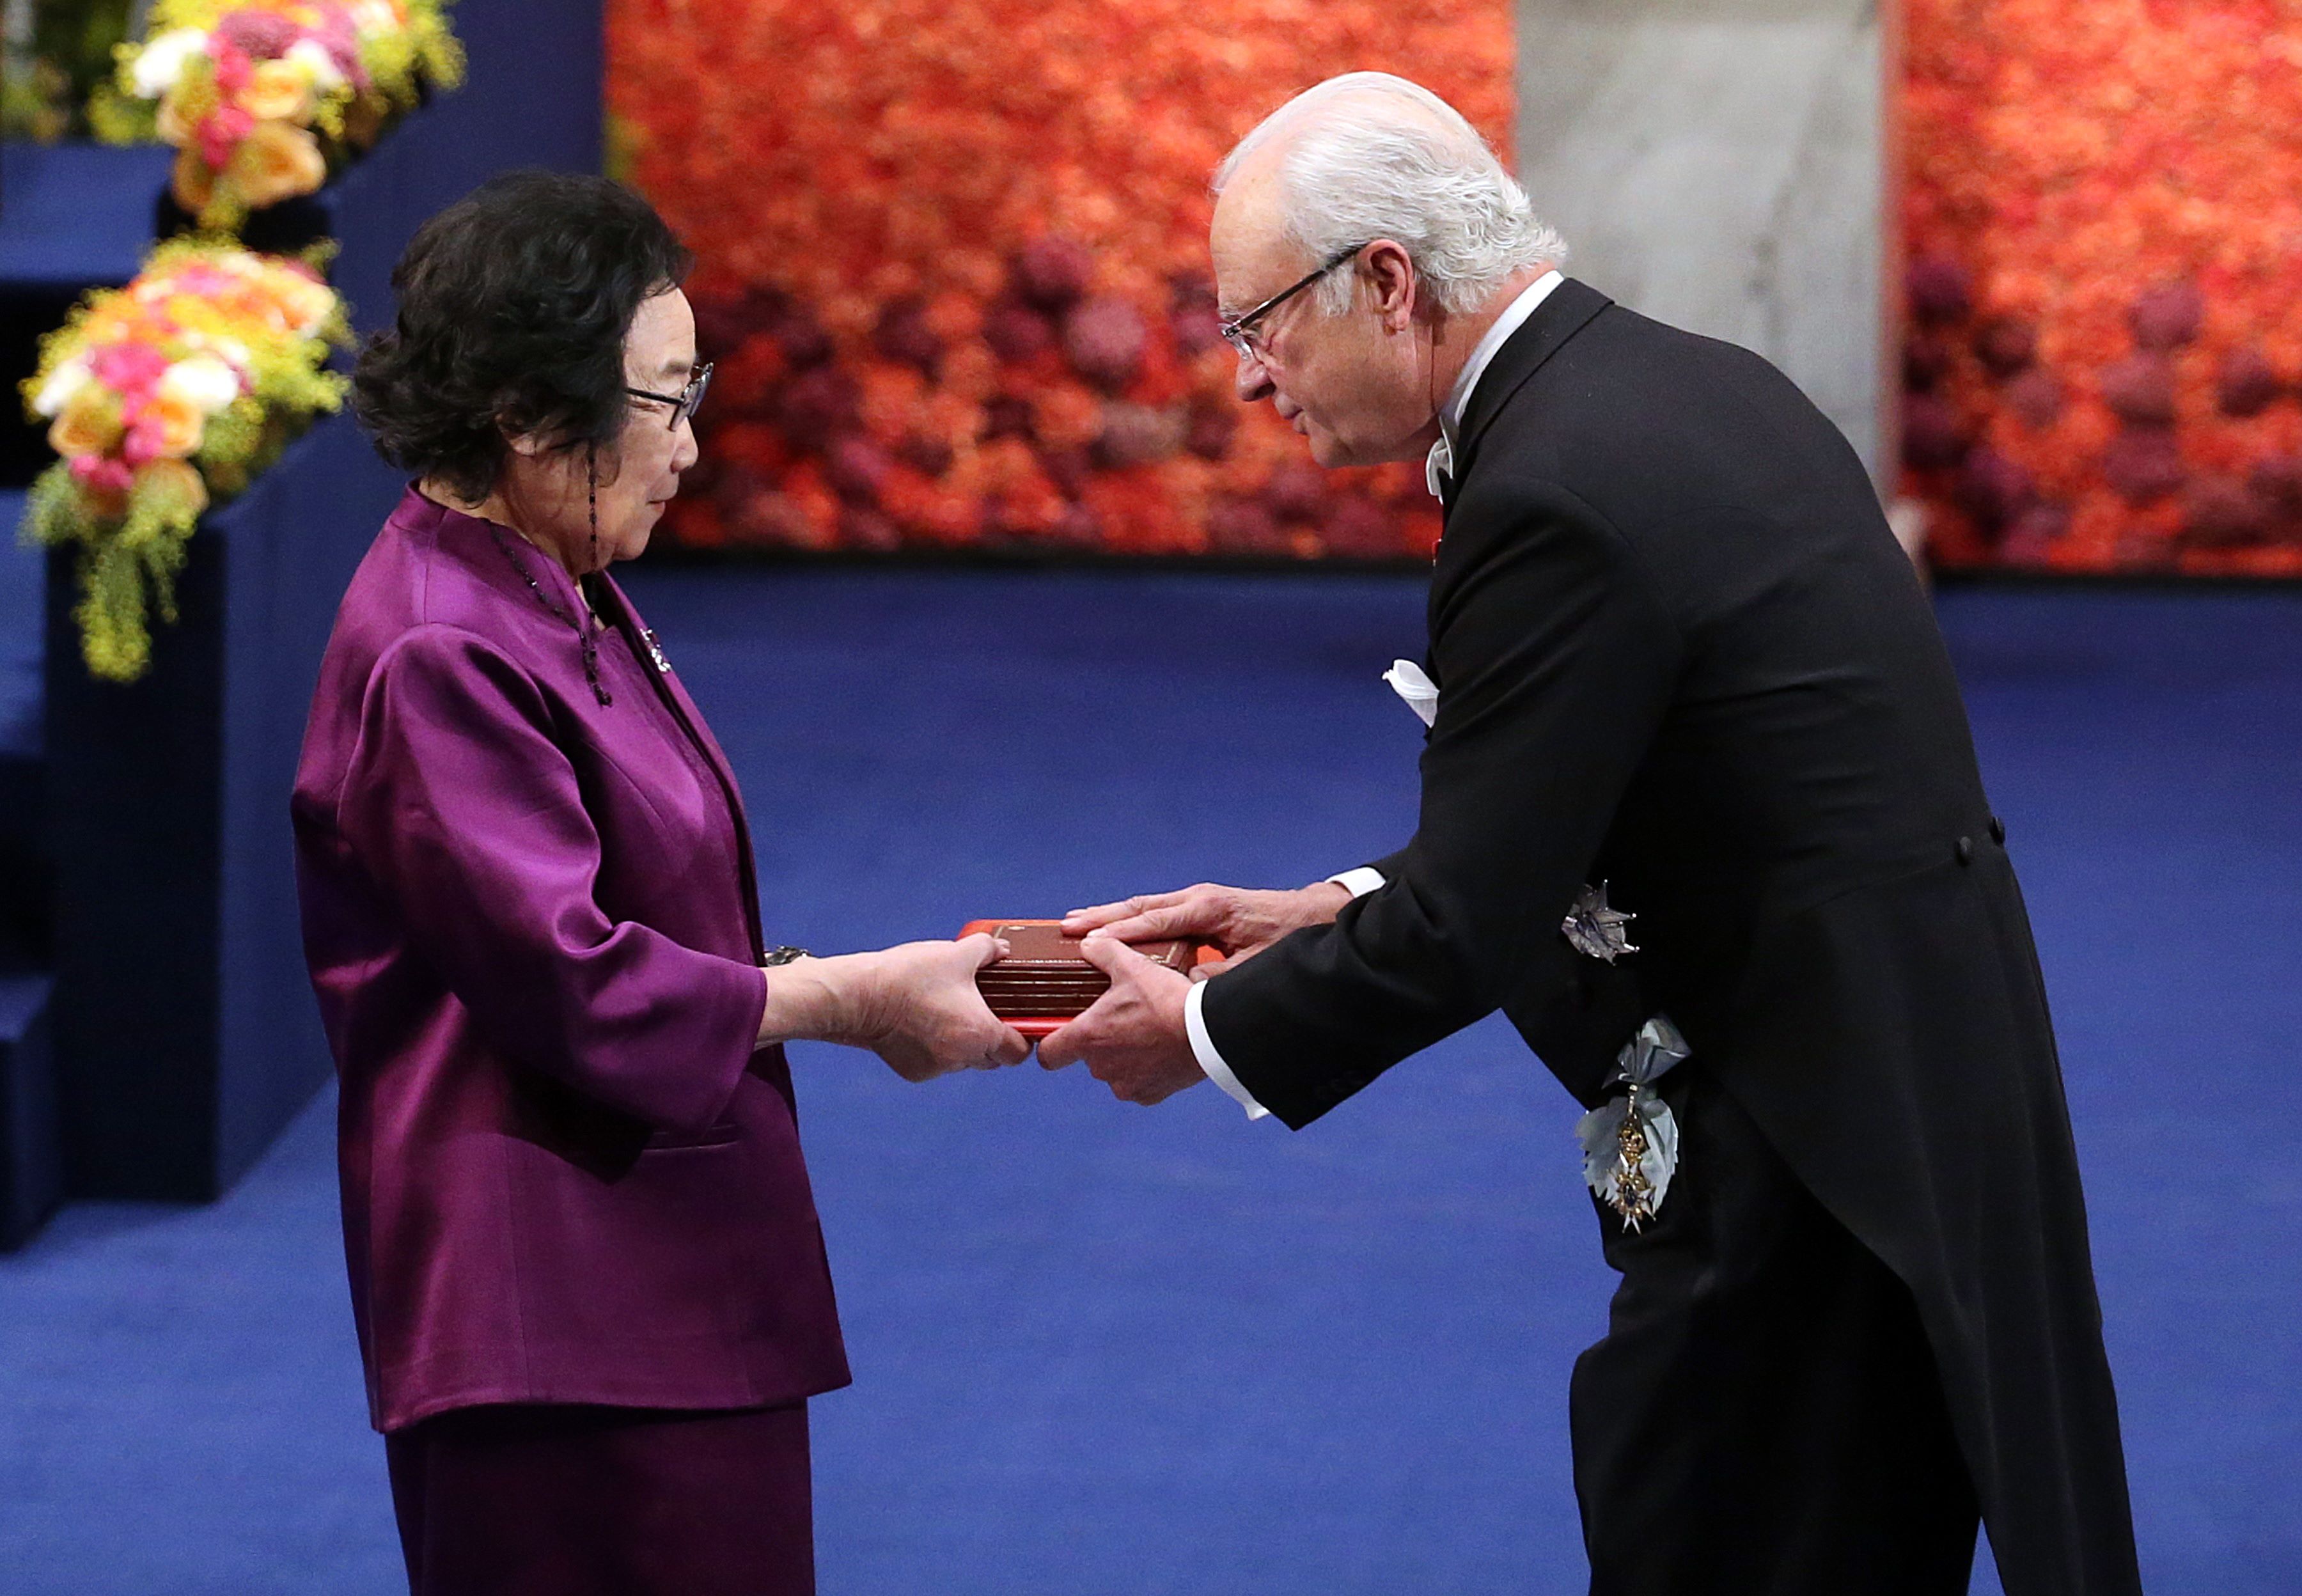 Chinese scientist Tu Youyou receives her medal from Sweden’s King Carl XVI Gustaf, after winning the 2015 Nobel Prize in medicine. Photo: AFP